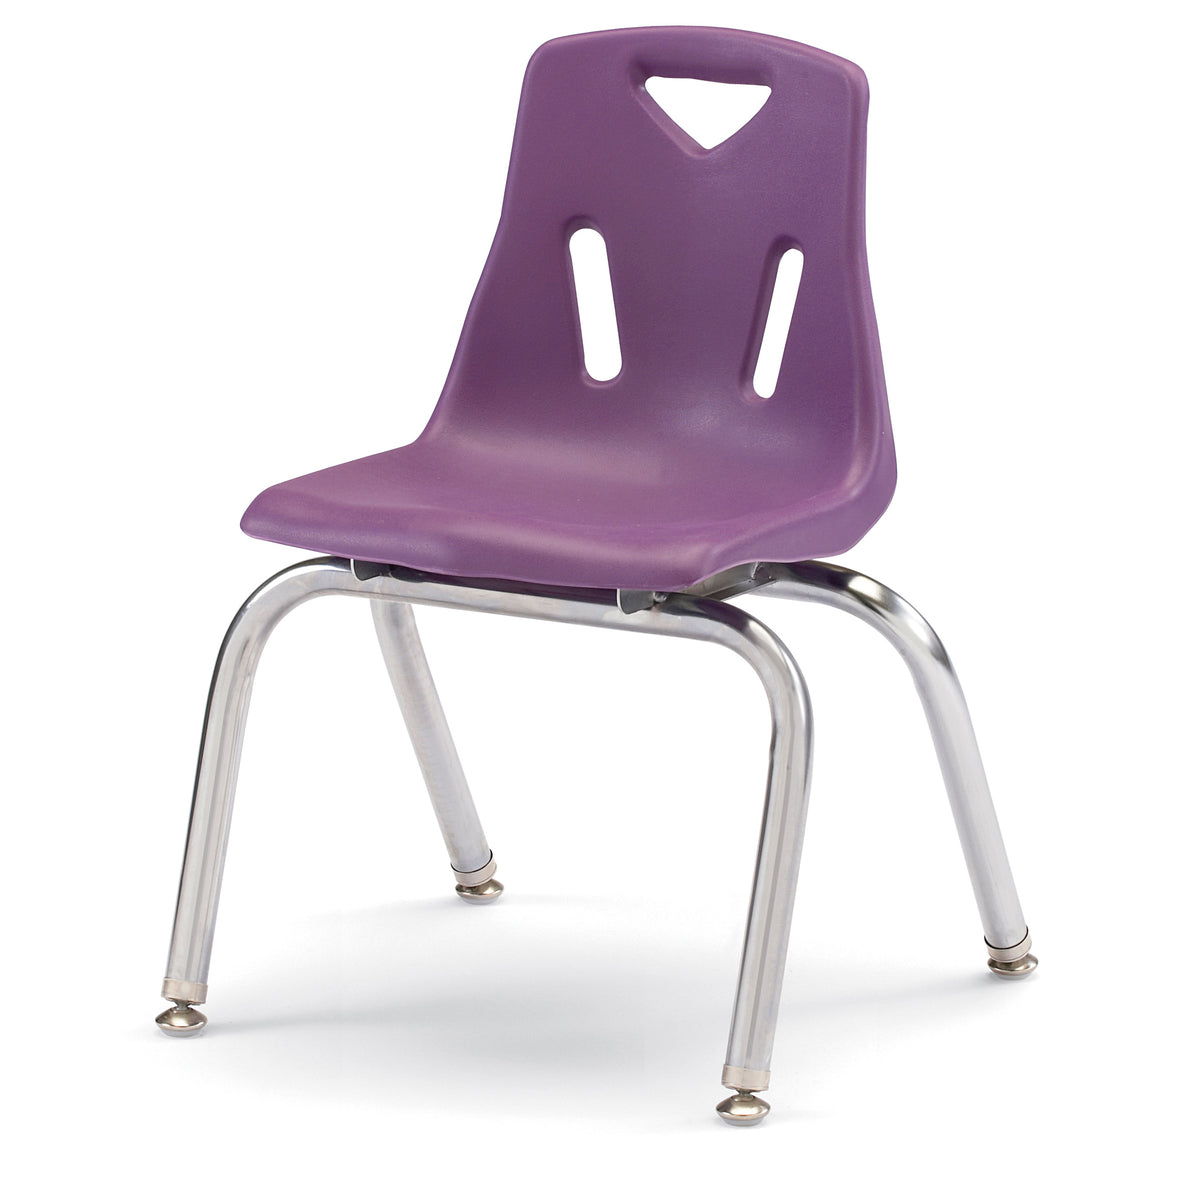 8144JC6004, Berries Stacking Chairs with Chrome-Plated Legs - 14" Ht - Set of 6 - Purple